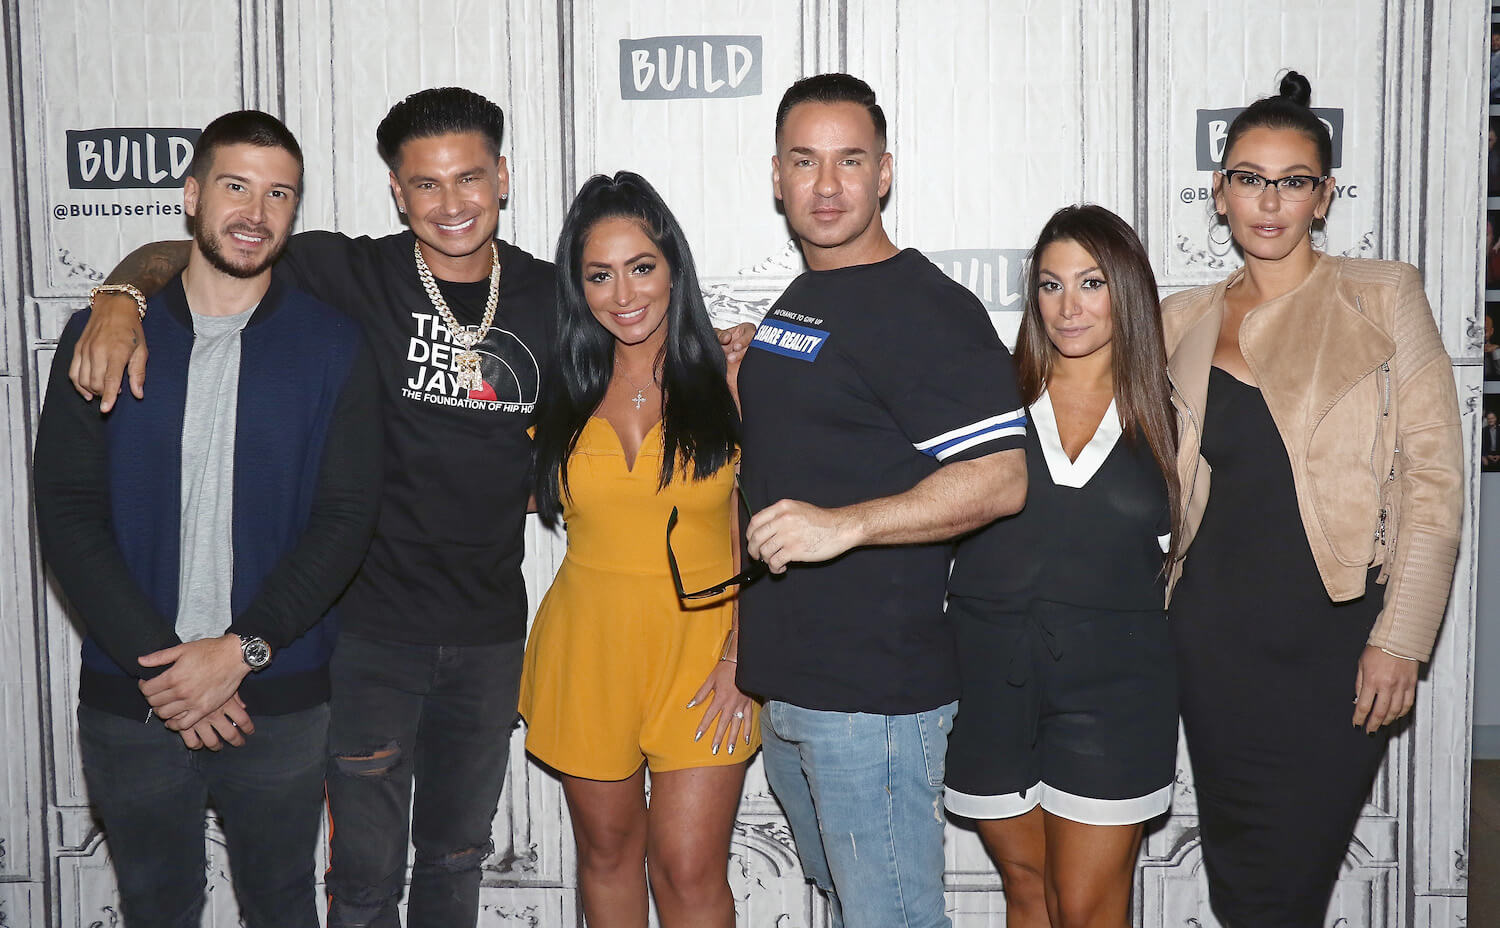 'Jersey Shore: Family Vacation' cast members Vinny Guadagnino, Pauly D, Angelina Pivarnick, Mike 'The Situation' Sorrentino, Deena Nicole Cortese, and Jenni 'JWOWW' Farley standing together 